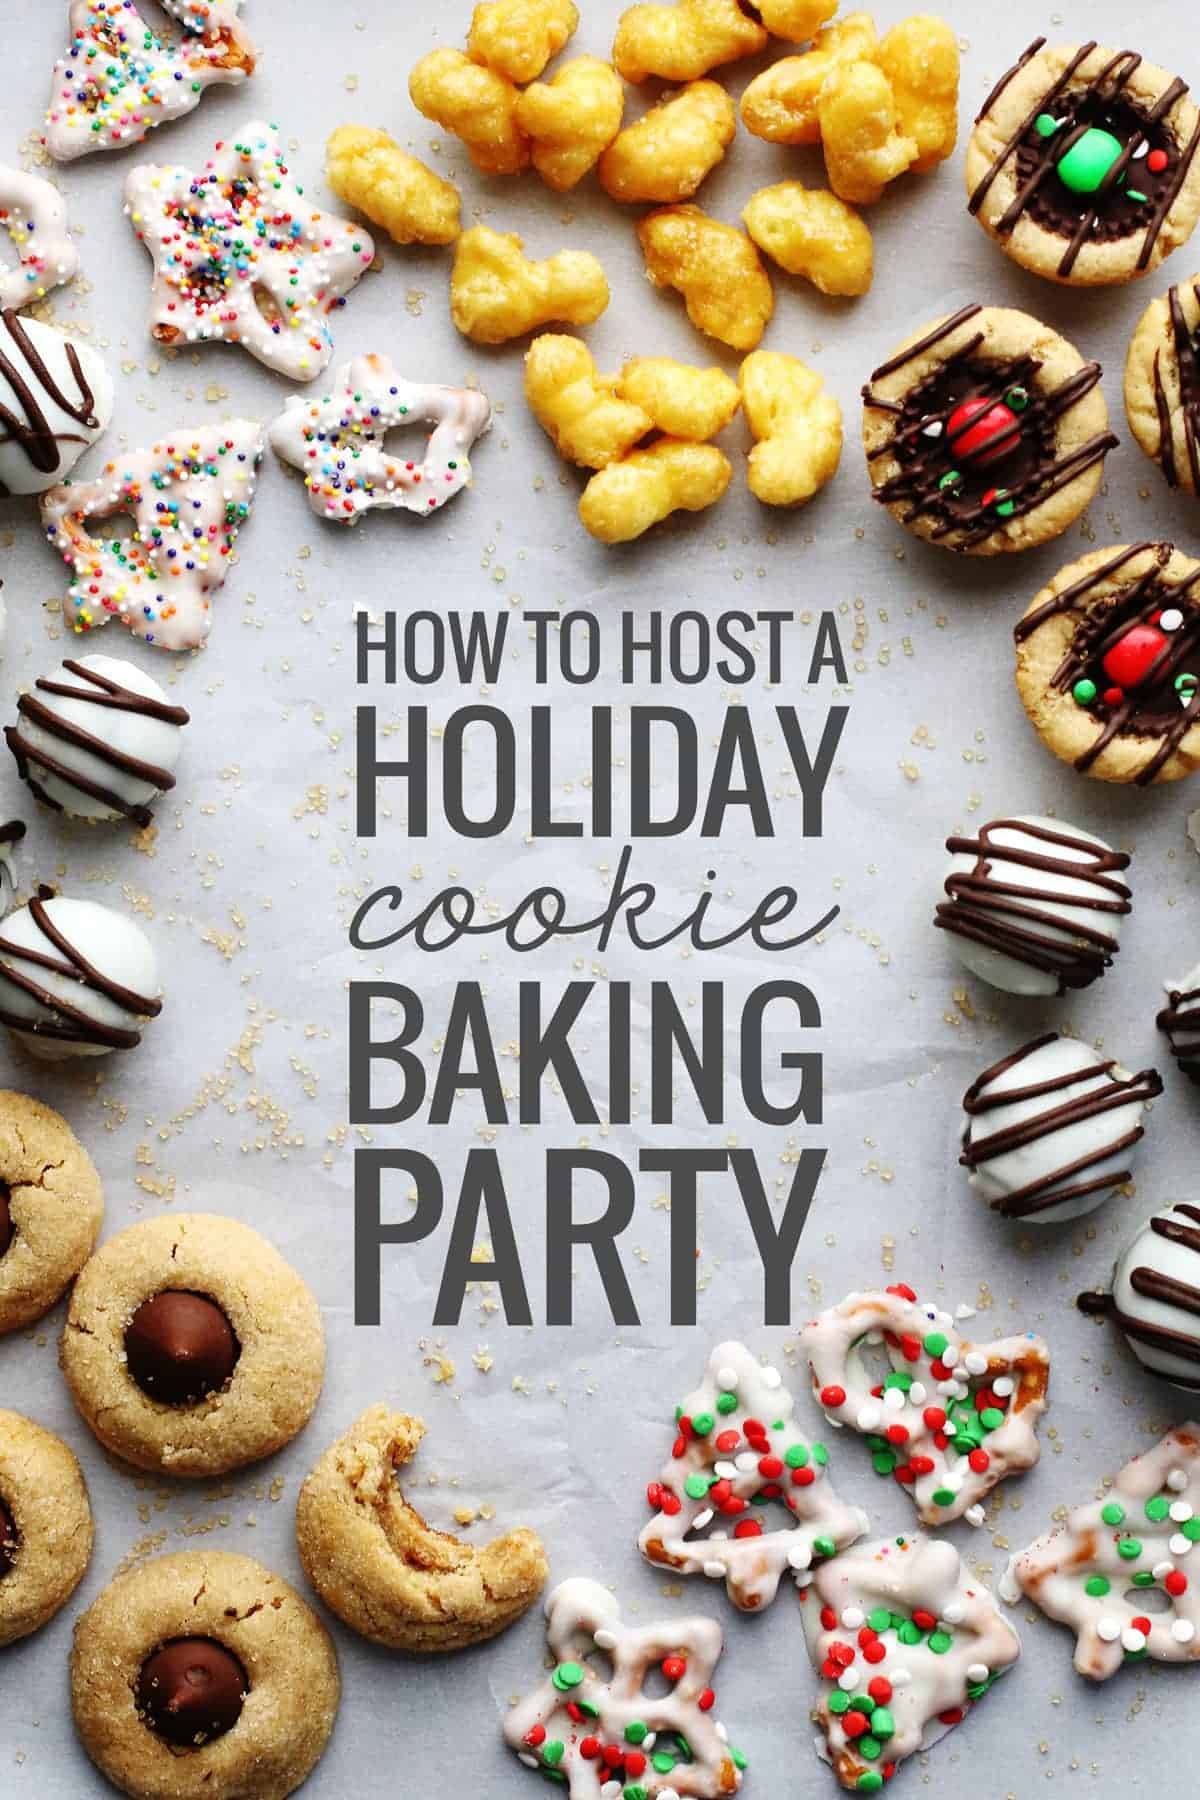 How to host a holiday cookie baking party with cookies and treats.